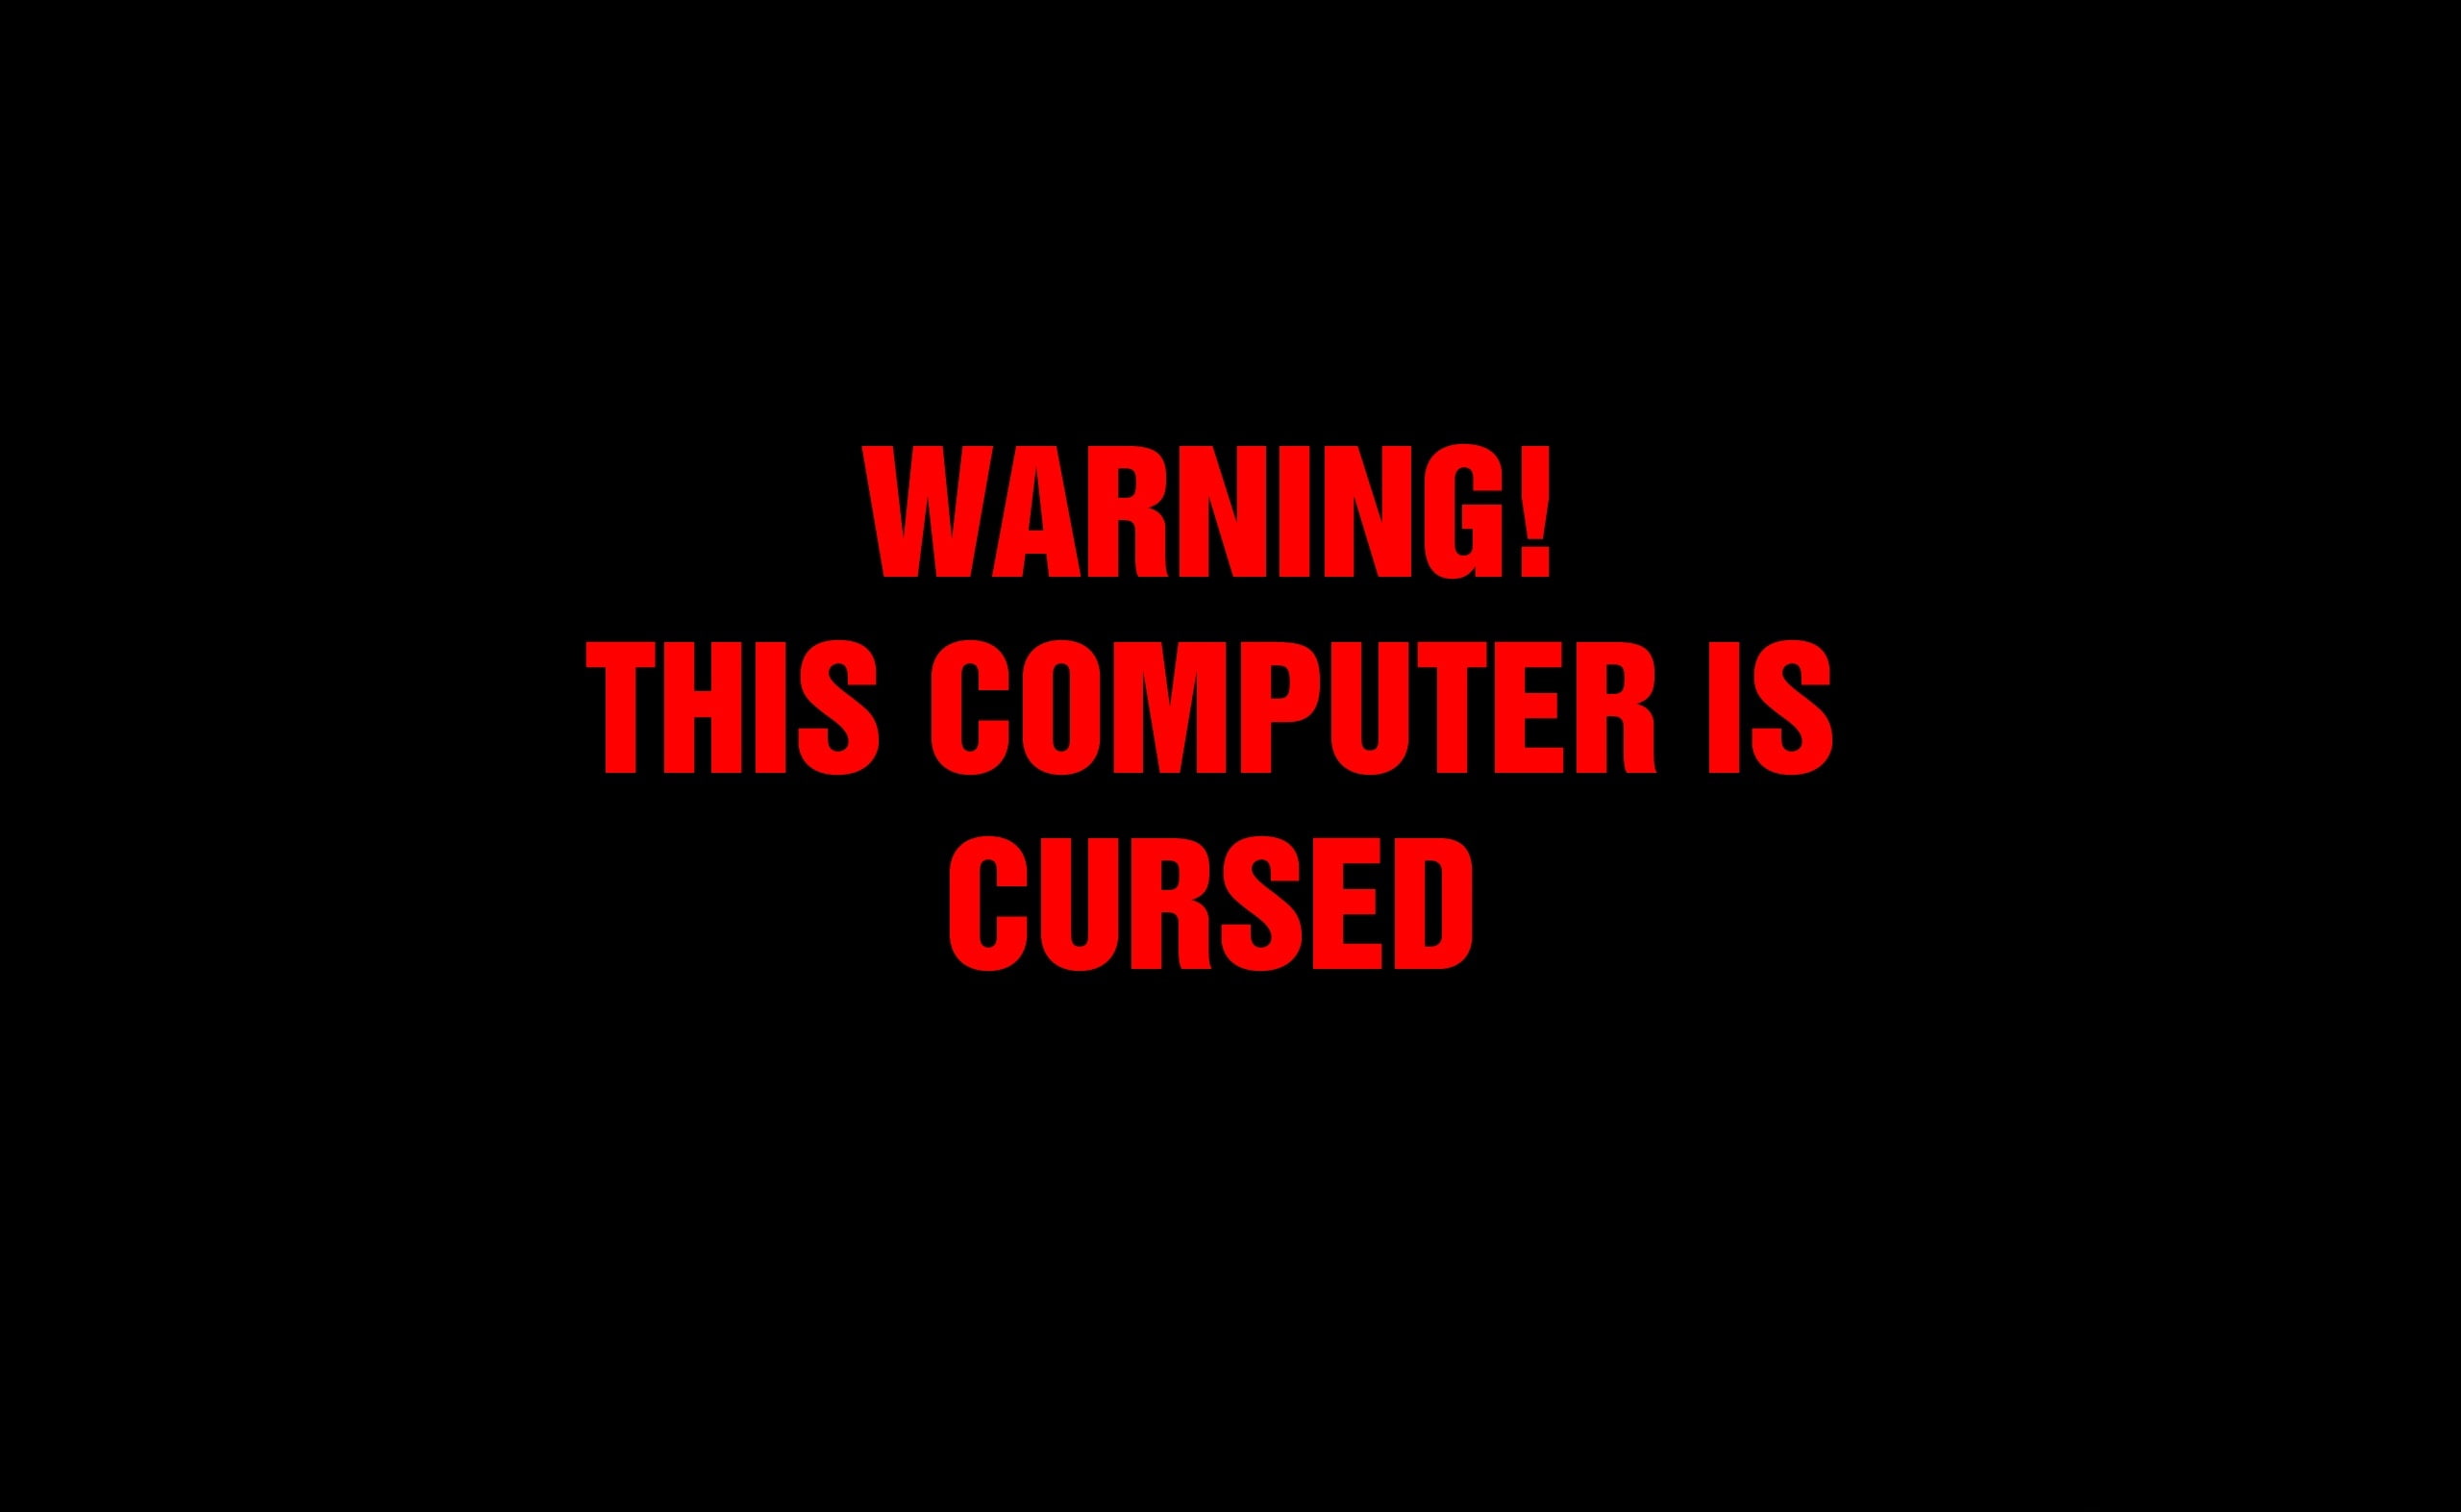 Cursed HD Wallpaper, warning! this computer is cursed text, Funny